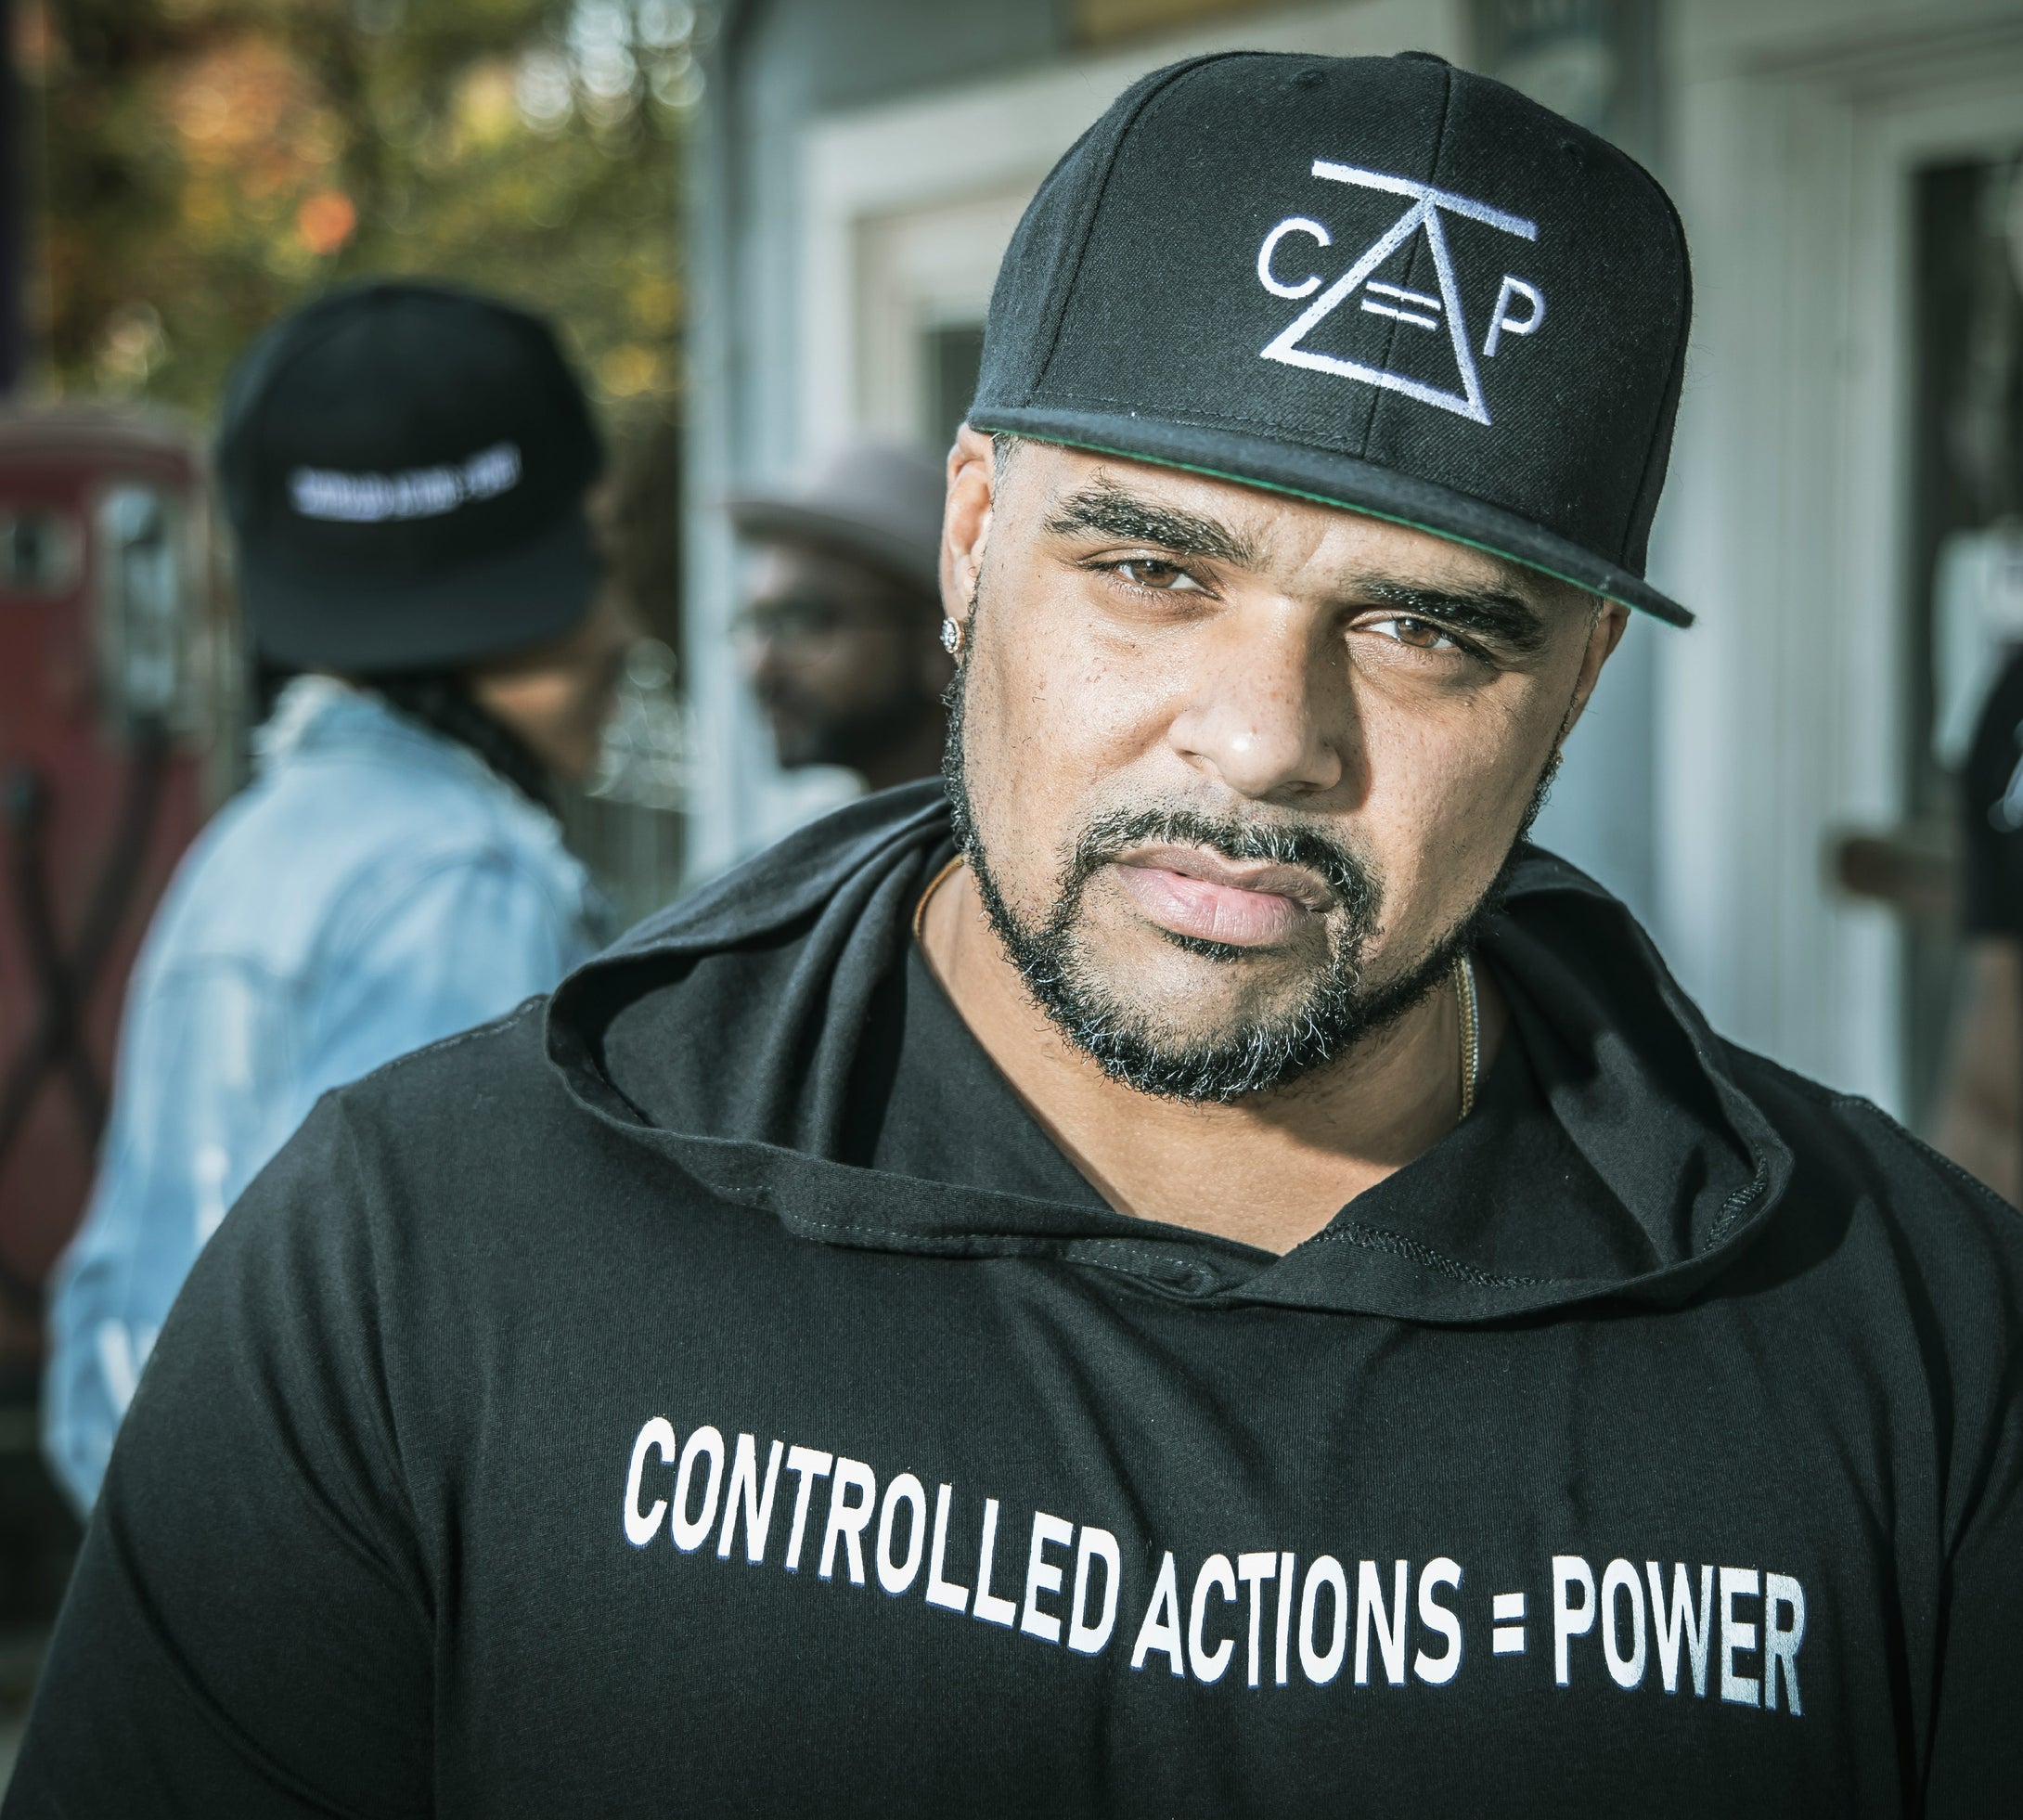 Controlled Actions = Power Snapback